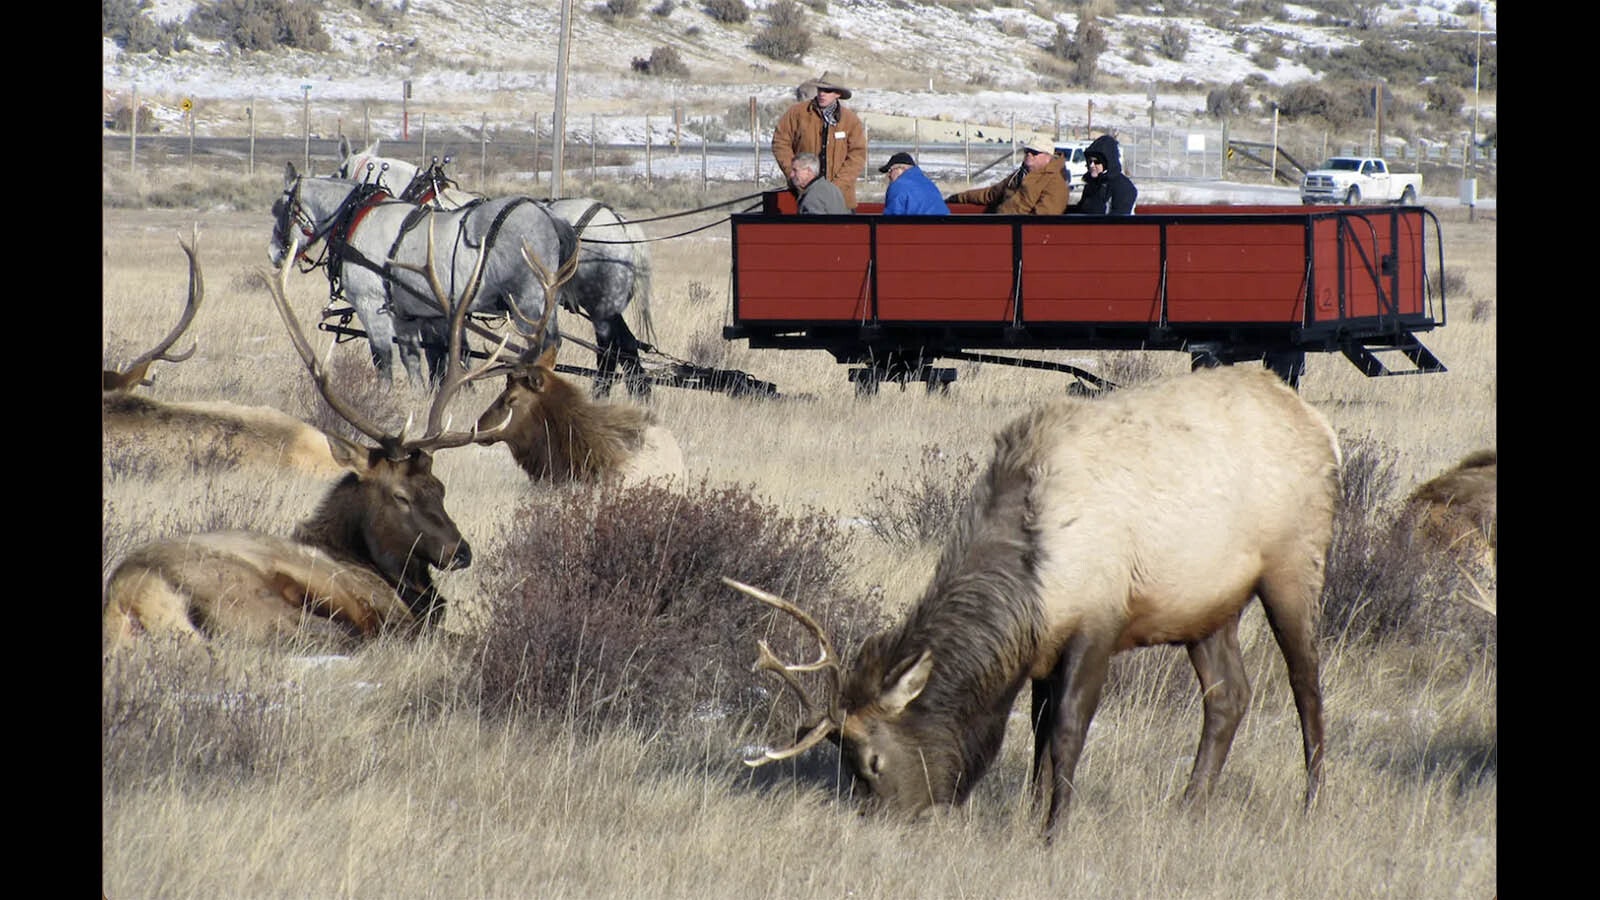 Elk Refuge sleigh rides are a great way to get up close to wildlife.